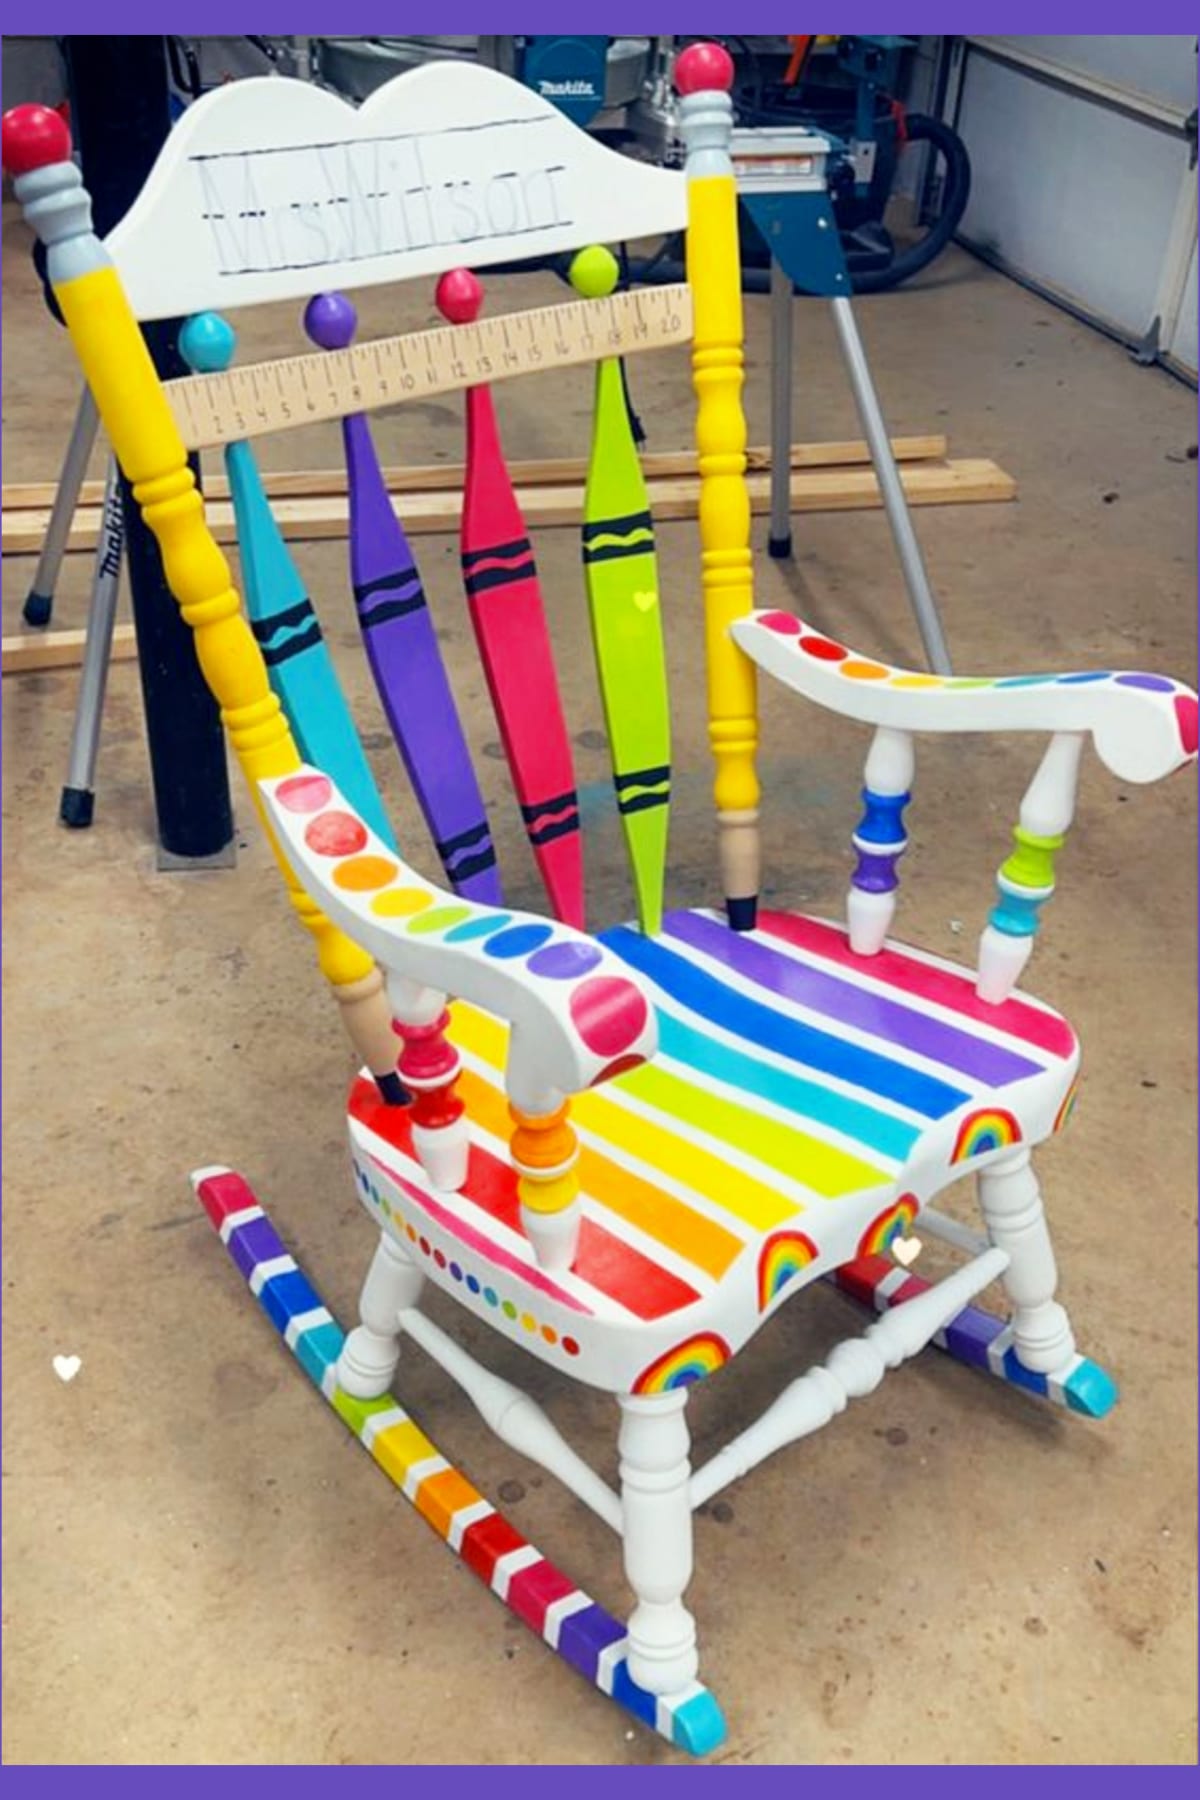 painted teacher chair - teacher rocking chairs DIY projects to try for classroom decorating